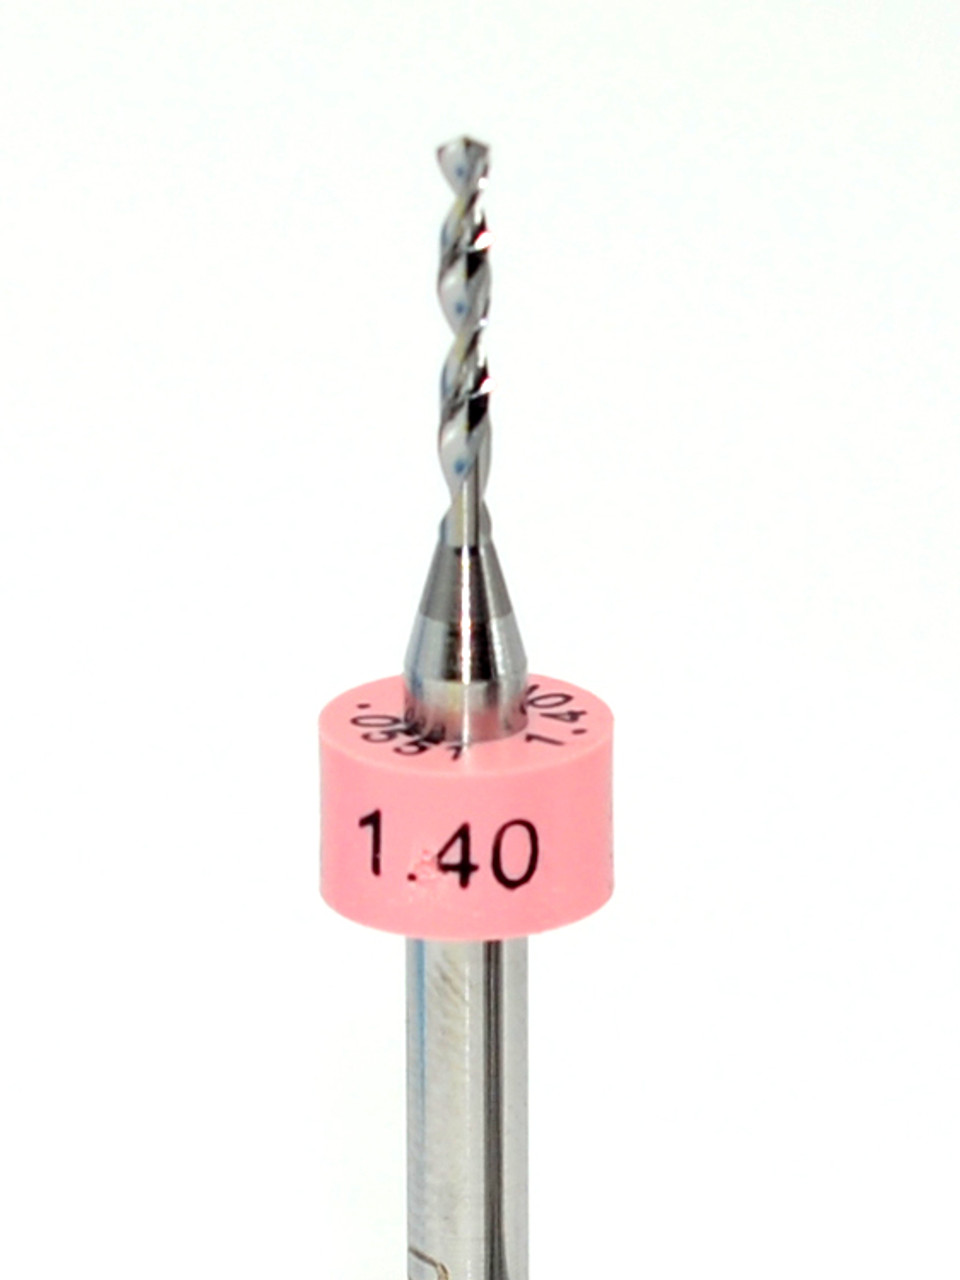 Drill bit Size: 1.40mm   

 Flute length: sizes .50 to .65mm 8.90mm, sizes .70 to 2.50mm 10.50mm

Drill Point 135Â°, Shank .125â€ / 3.18mm,Overall length 38mm /1.50â€

All bits have plastic size rings, Material Micro-Grain Carbide Grade ISO K20 / K30

Drill bits Self centering on flat surface Other surfaces use center drill first